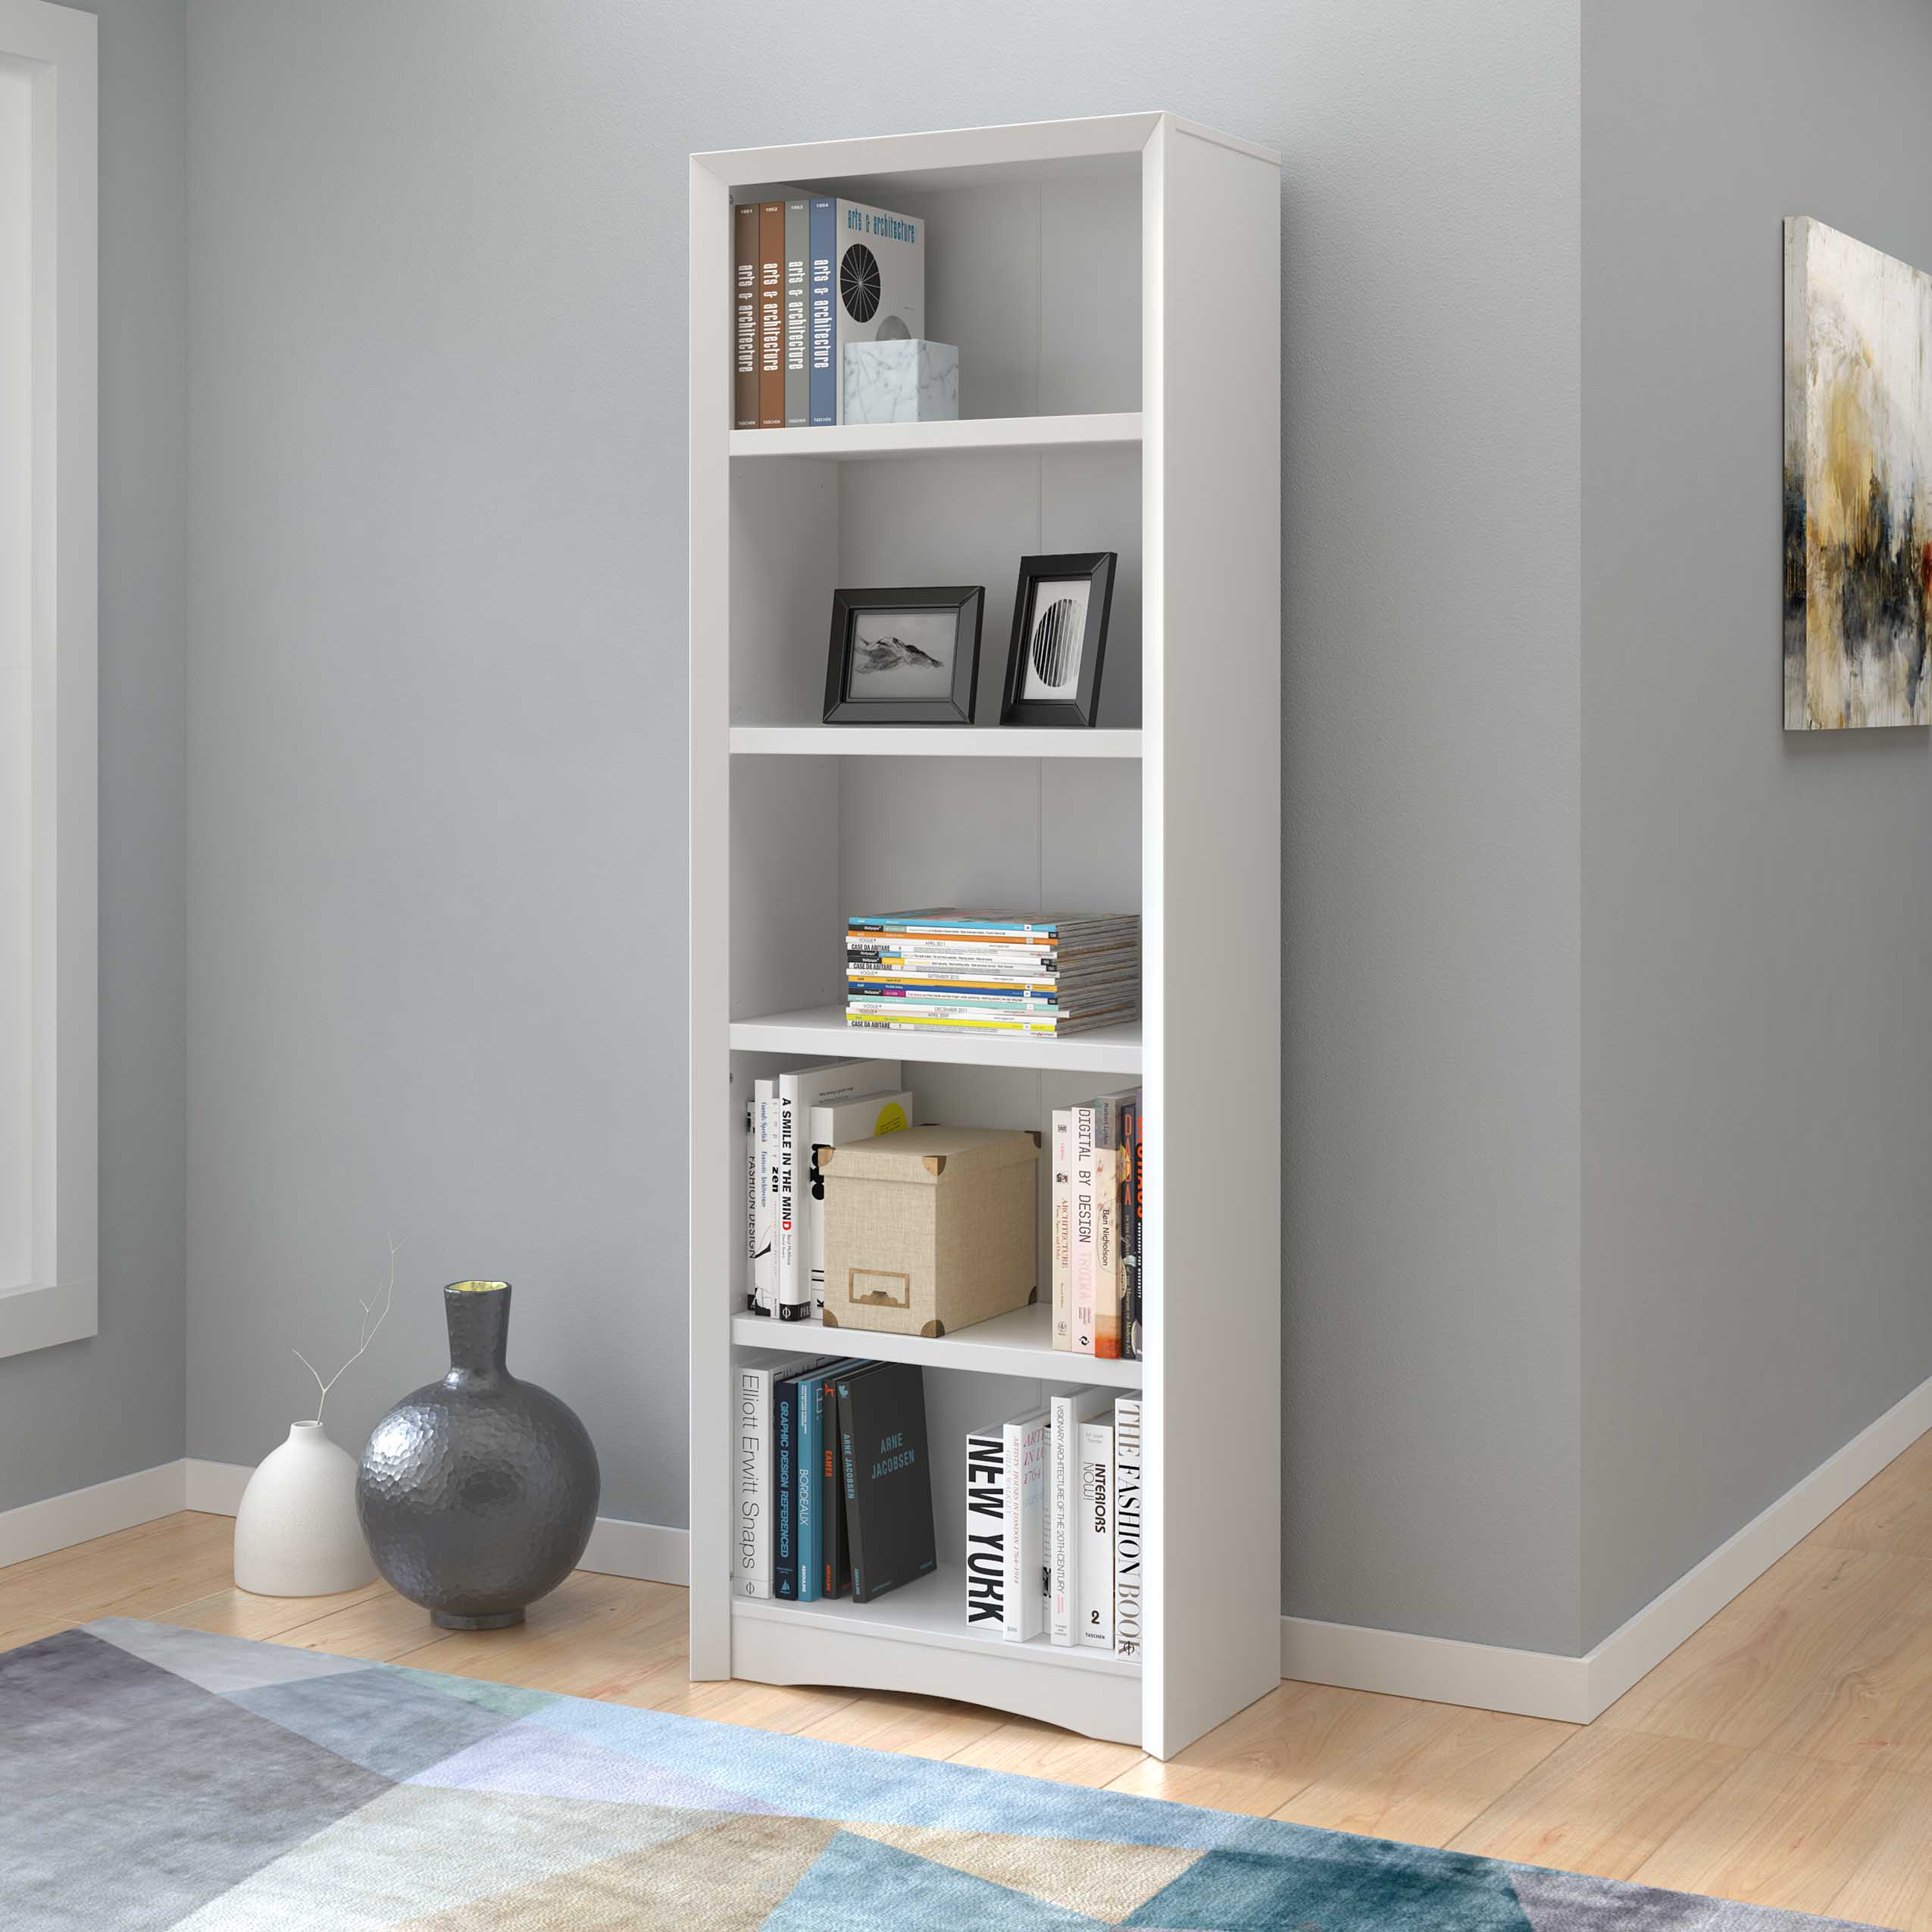 Vineego Wood Bookcase Tall Book Shelves 5 Display Storage Organization Furniture for Living Room,Ivory White, Size: 28.34 inch x 11.41 inch x 71.25